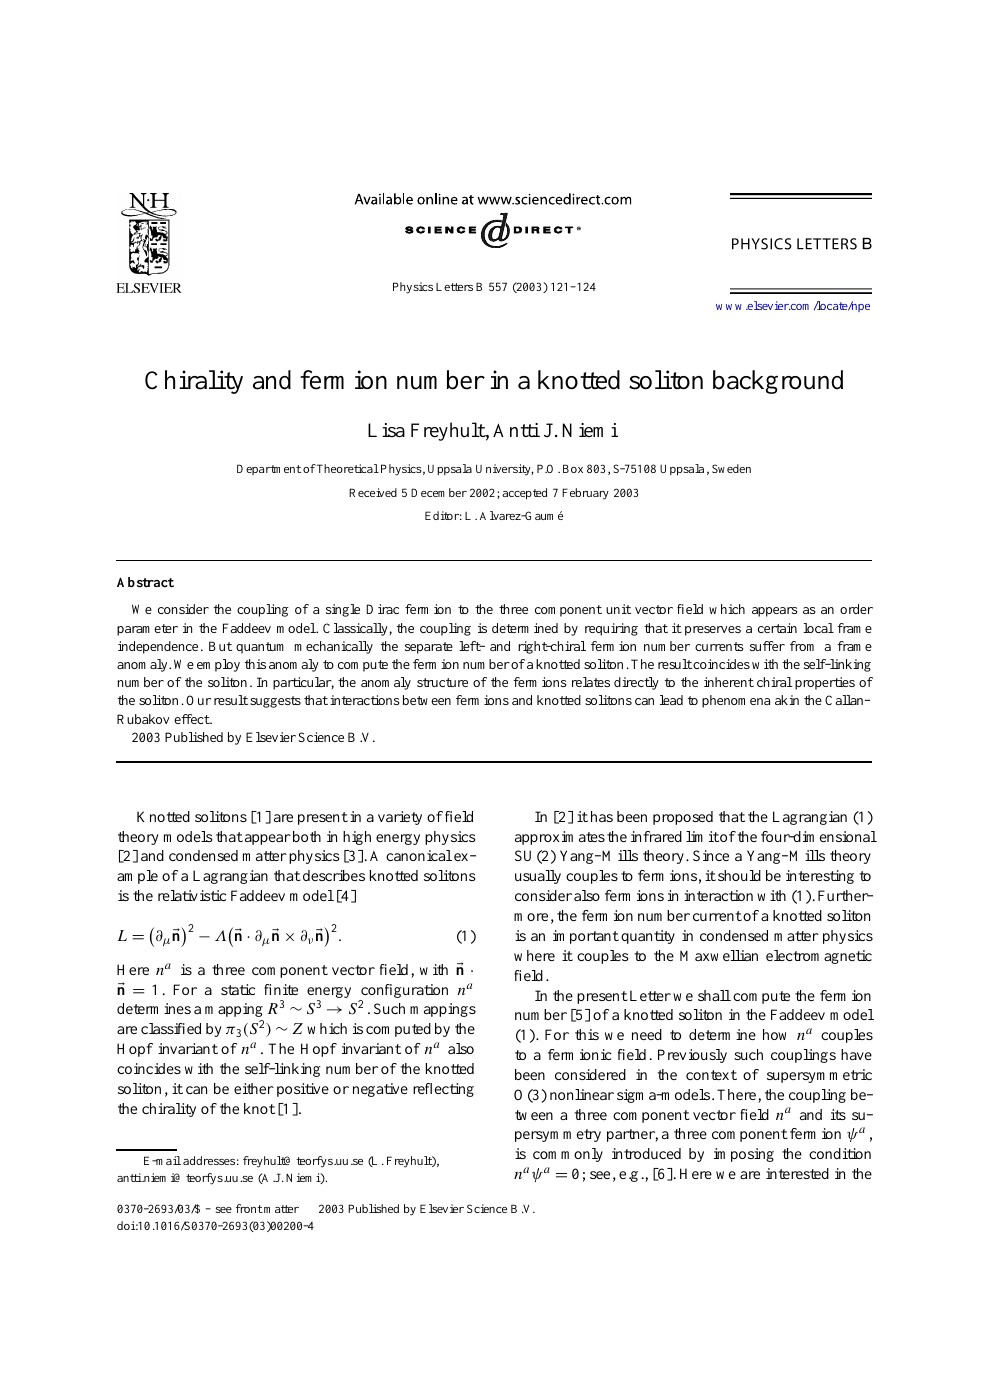 Chirality And Fermion Number In A Knotted Soliton Background Topic Of Research Paper In Physical Sciences Download Scholarly Article Pdf And Read For Free On Cyberleninka Open Science Hub